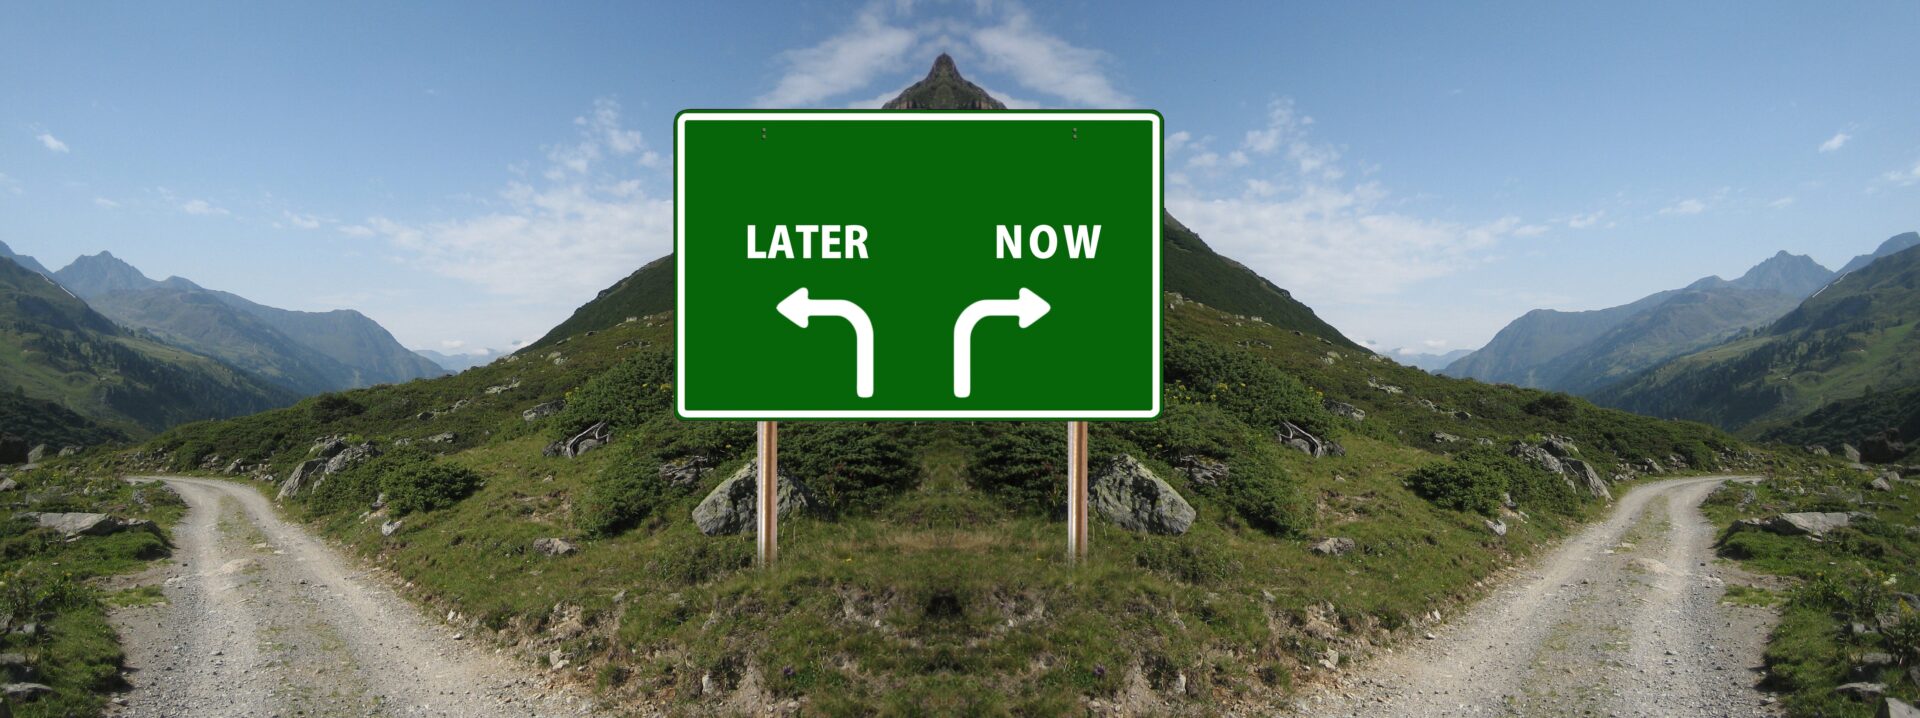 Signpost at fork in road saying 'now' or 'later' (Image by Gerd Altmann from Pixabay)